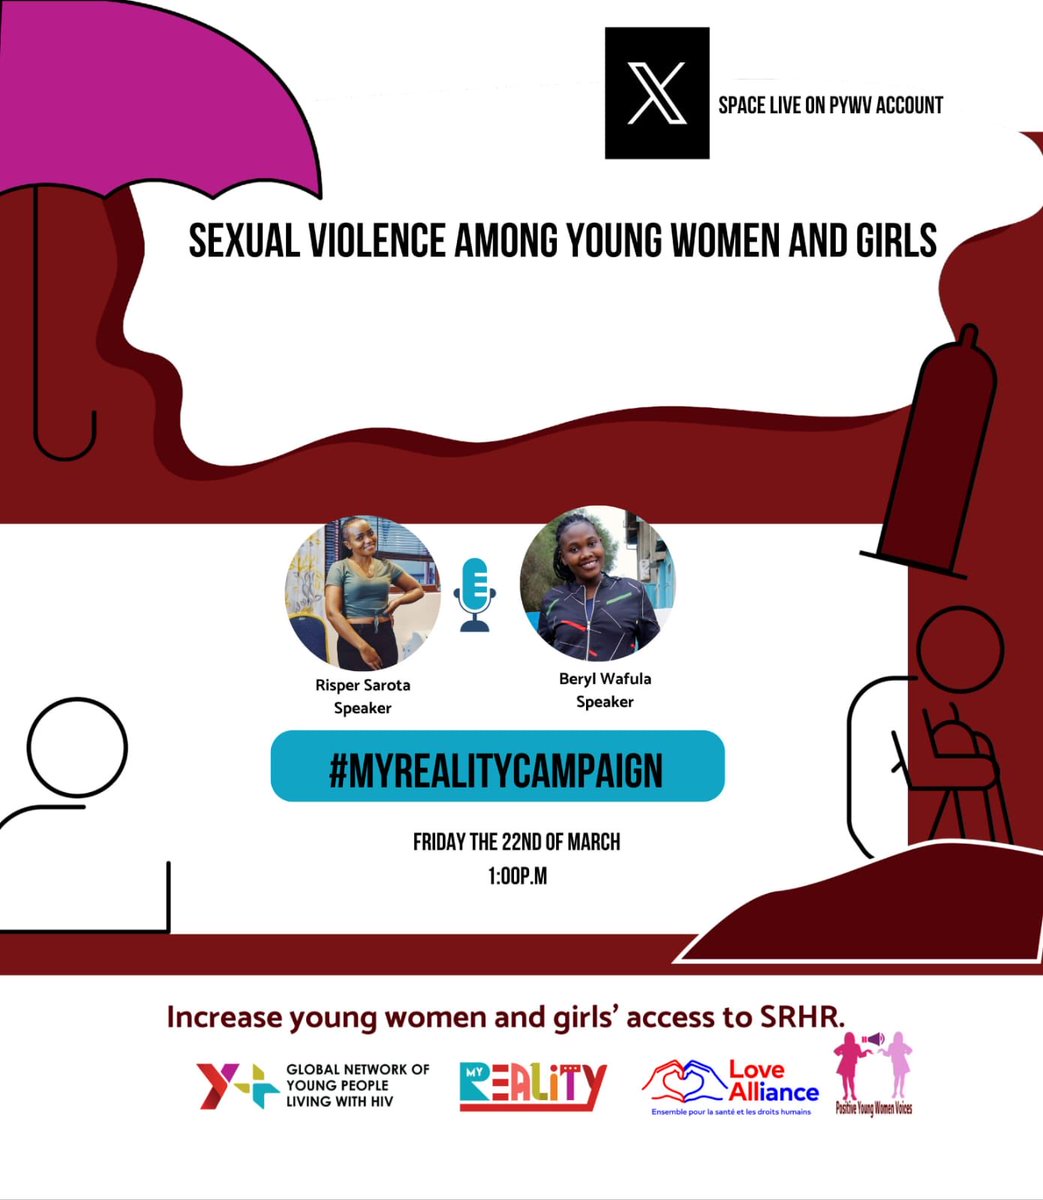 Join us tomorrow as we have the conversation on sexual violence among young women and girls.
#MyRealityCampaign
⁦@GirlsWomenPower⁩